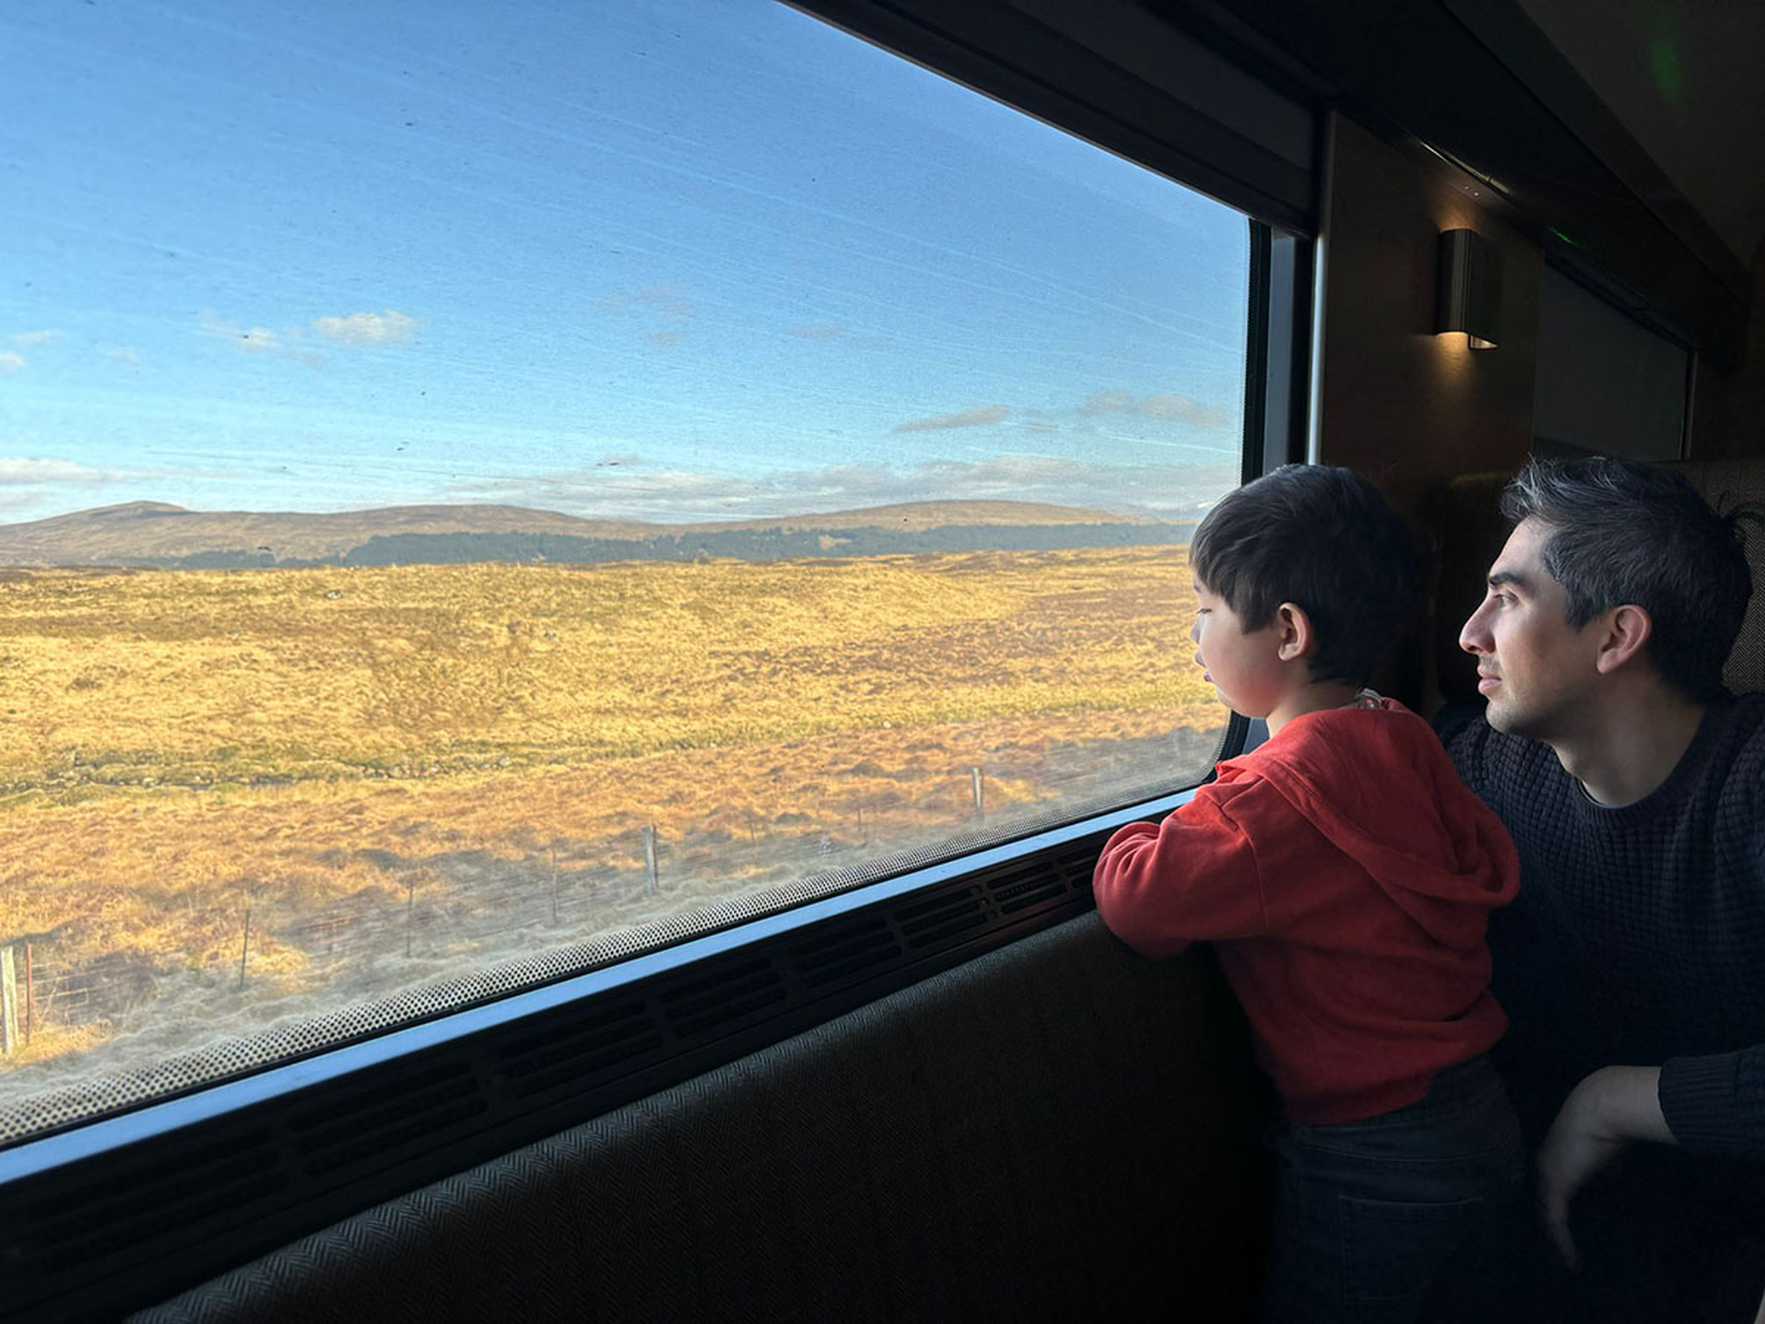 Everett looks out of the train window at the countryside with his dad